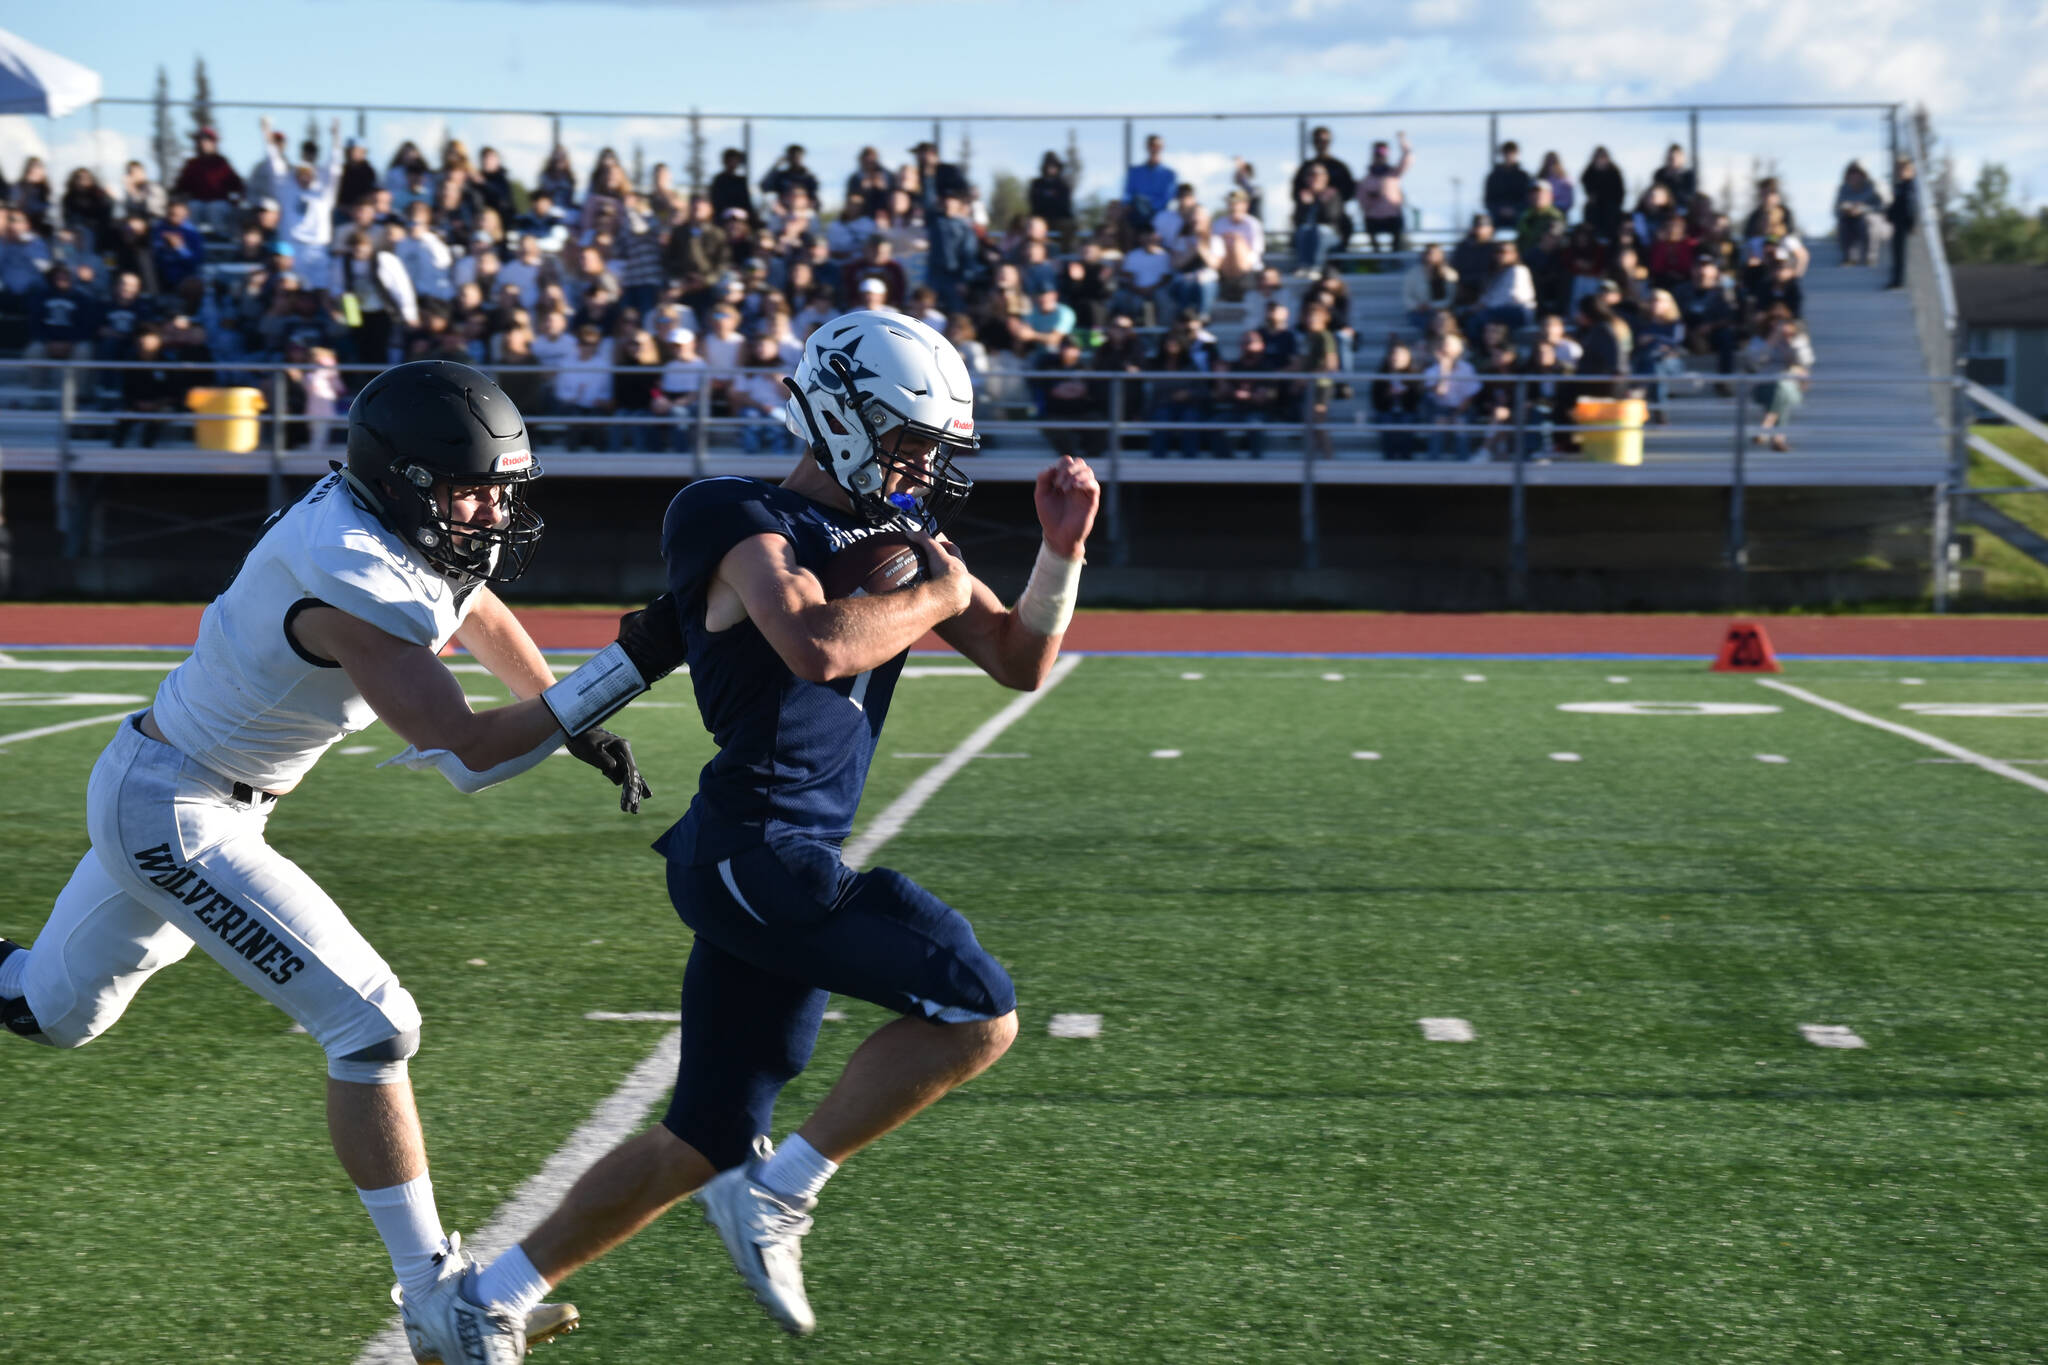 A South Anchorage defender tries to bring down Zac Buckbee during a run at Justin Maile Field in Soldotna, Alaska on Friday, Sept. 2, 2022. The run would be called back due to offsetting penalties. (Jake Dye/Peninsula Clarion)